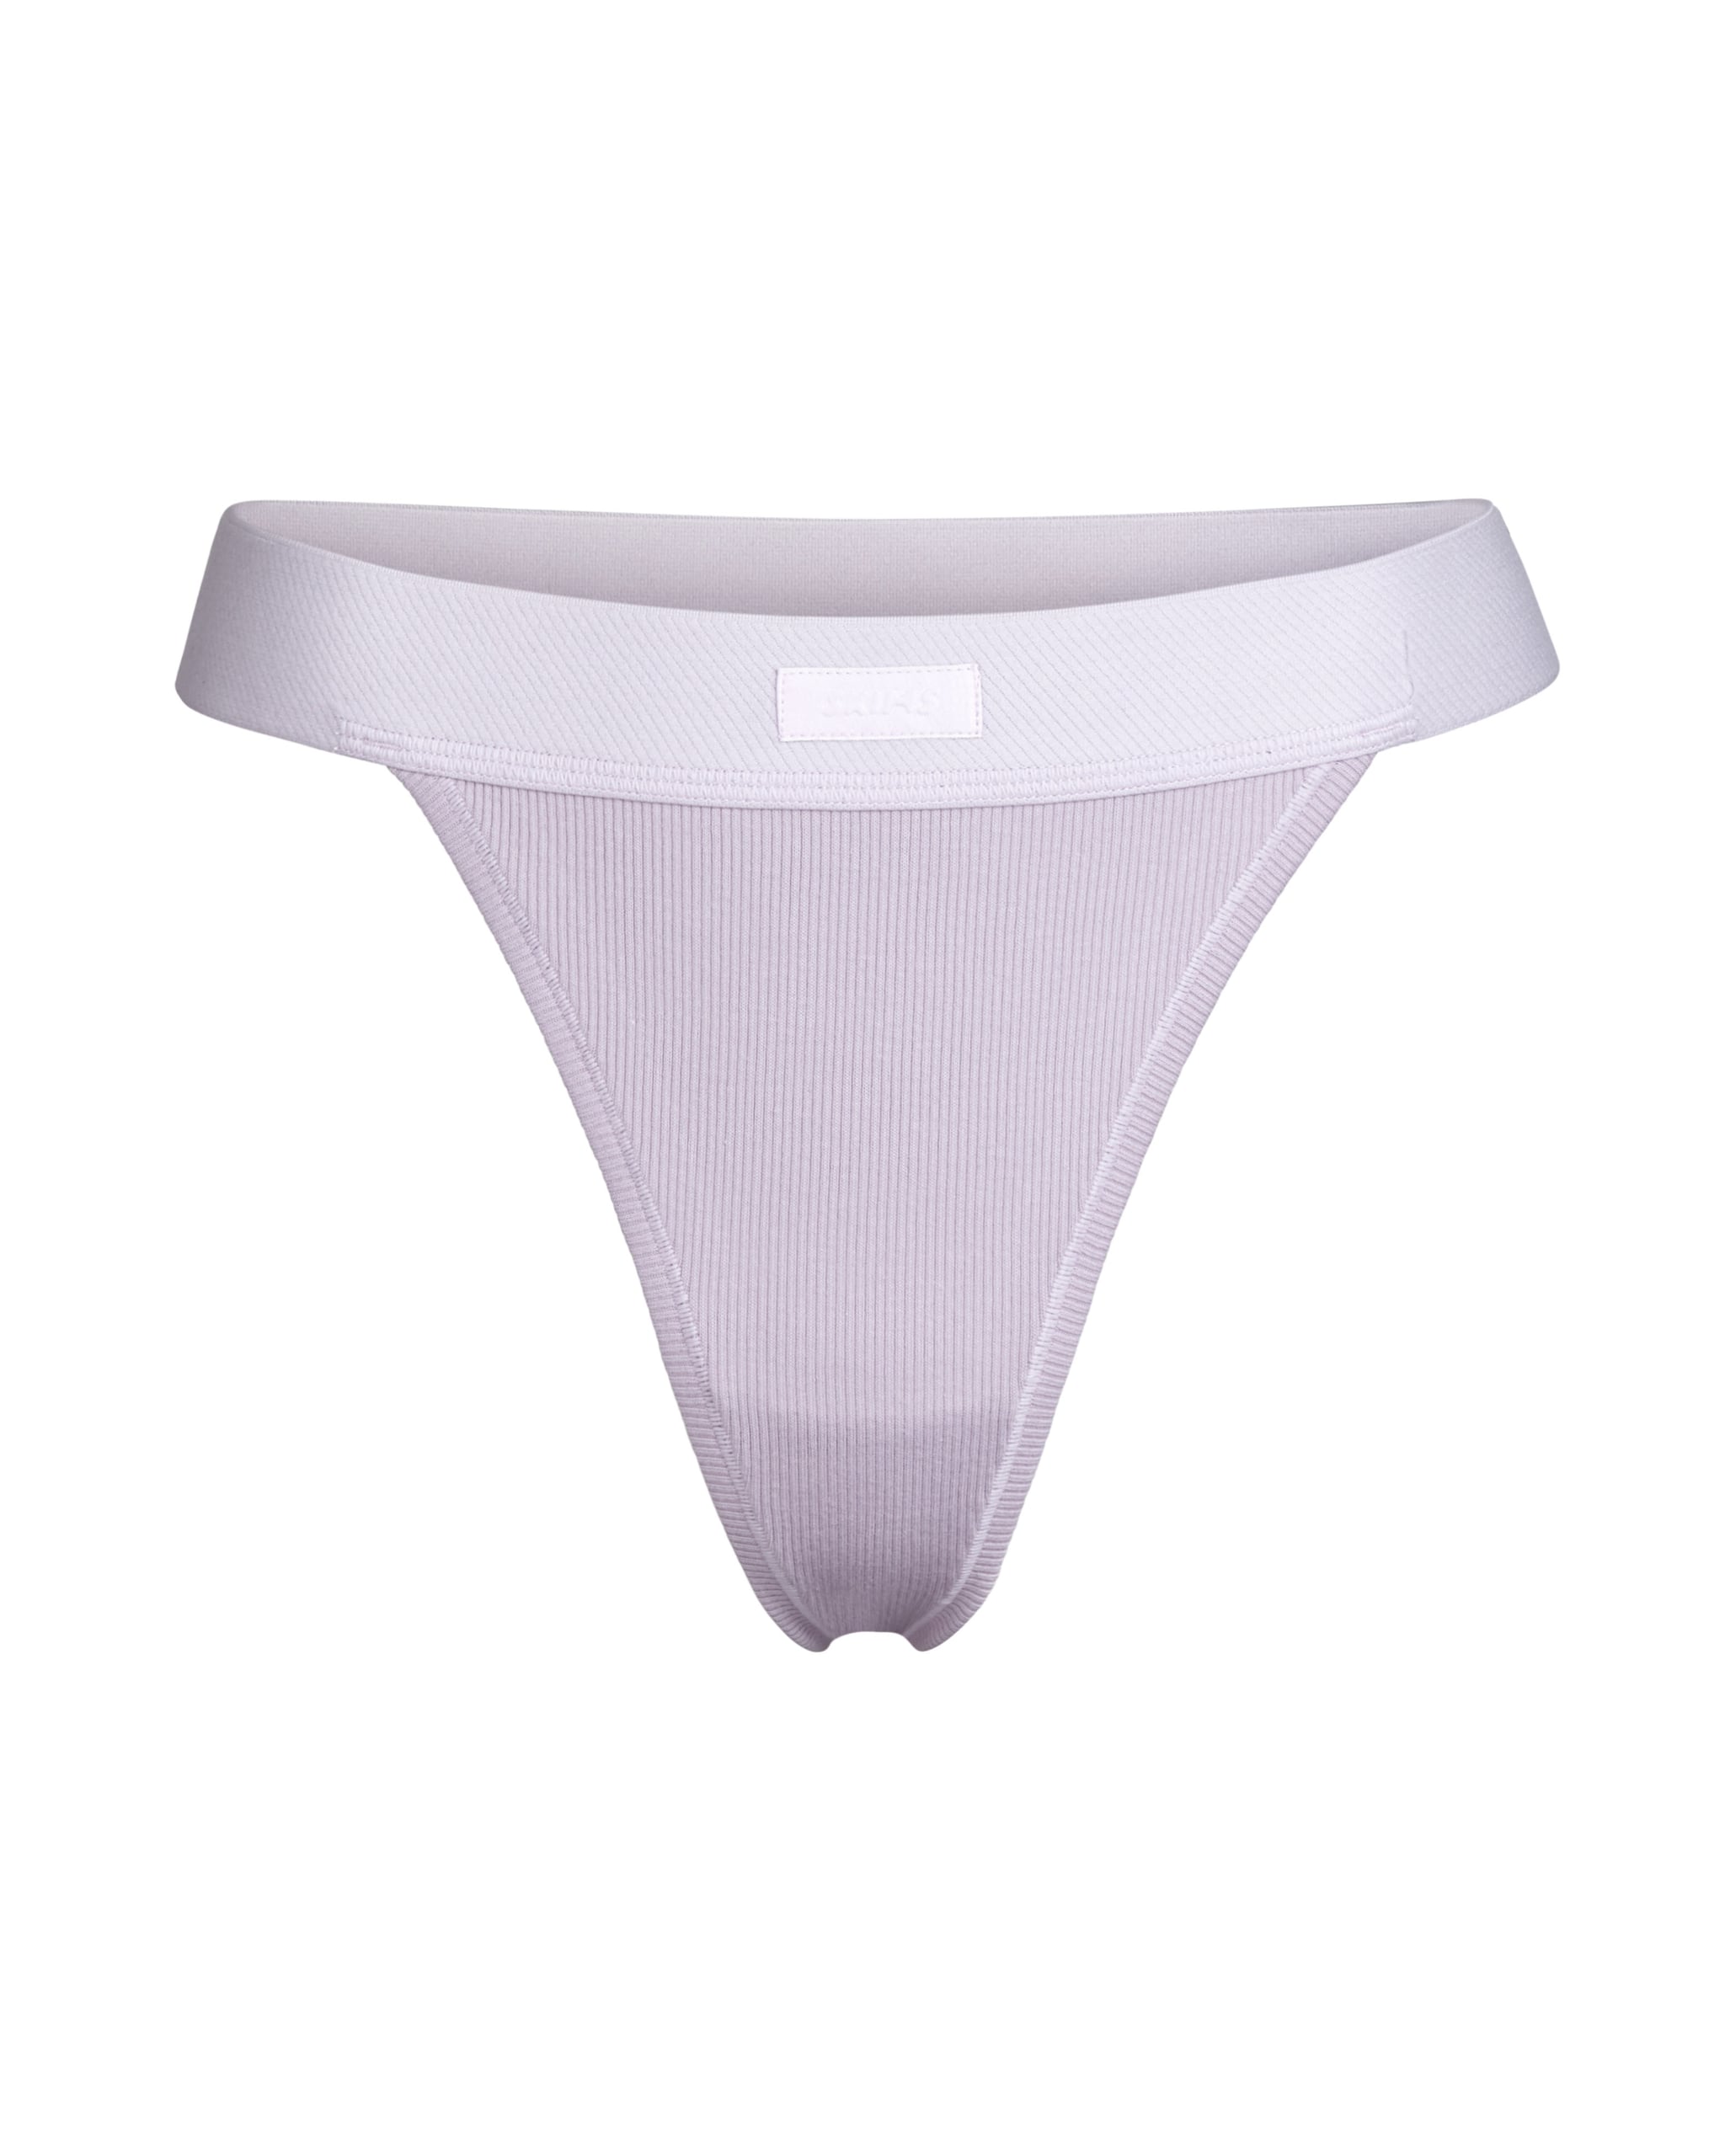 Skims Cotton Ribbed Thong in Iris Mica, Kim Kardashian Launches Cotton  Skims Collection, and TBH, It Looks a Lot Like Her Everyday Clothes